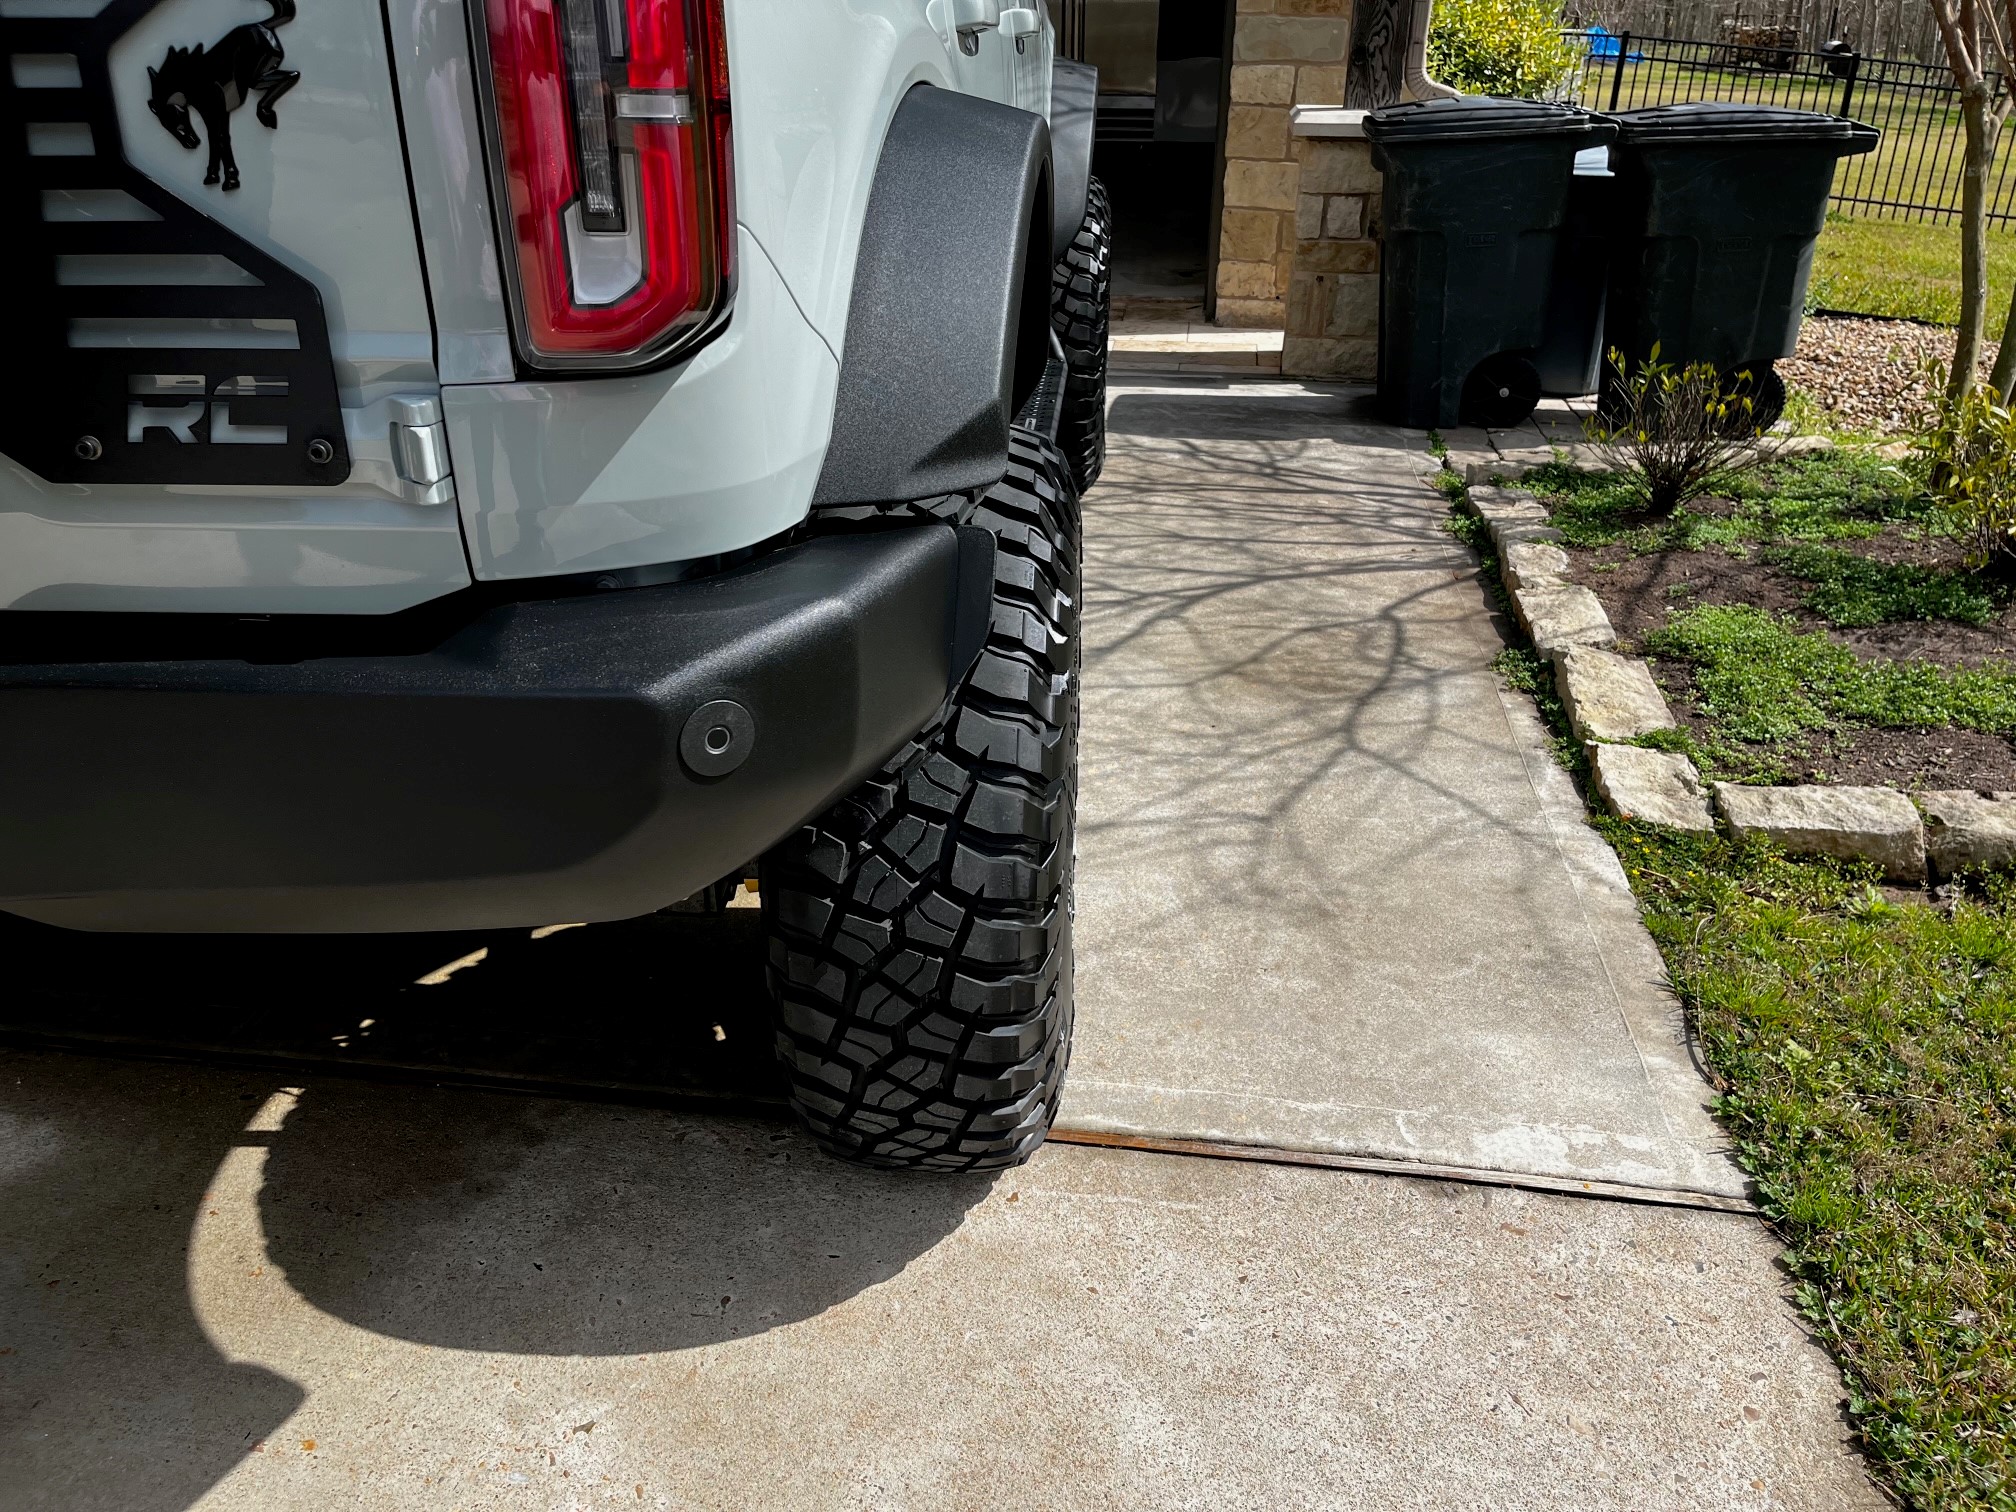 Ford Bronco 37's with 5" Rough Country Lift on Wildtrak EB2C4EB1-B168-4D20-9DAB-8A5882821237